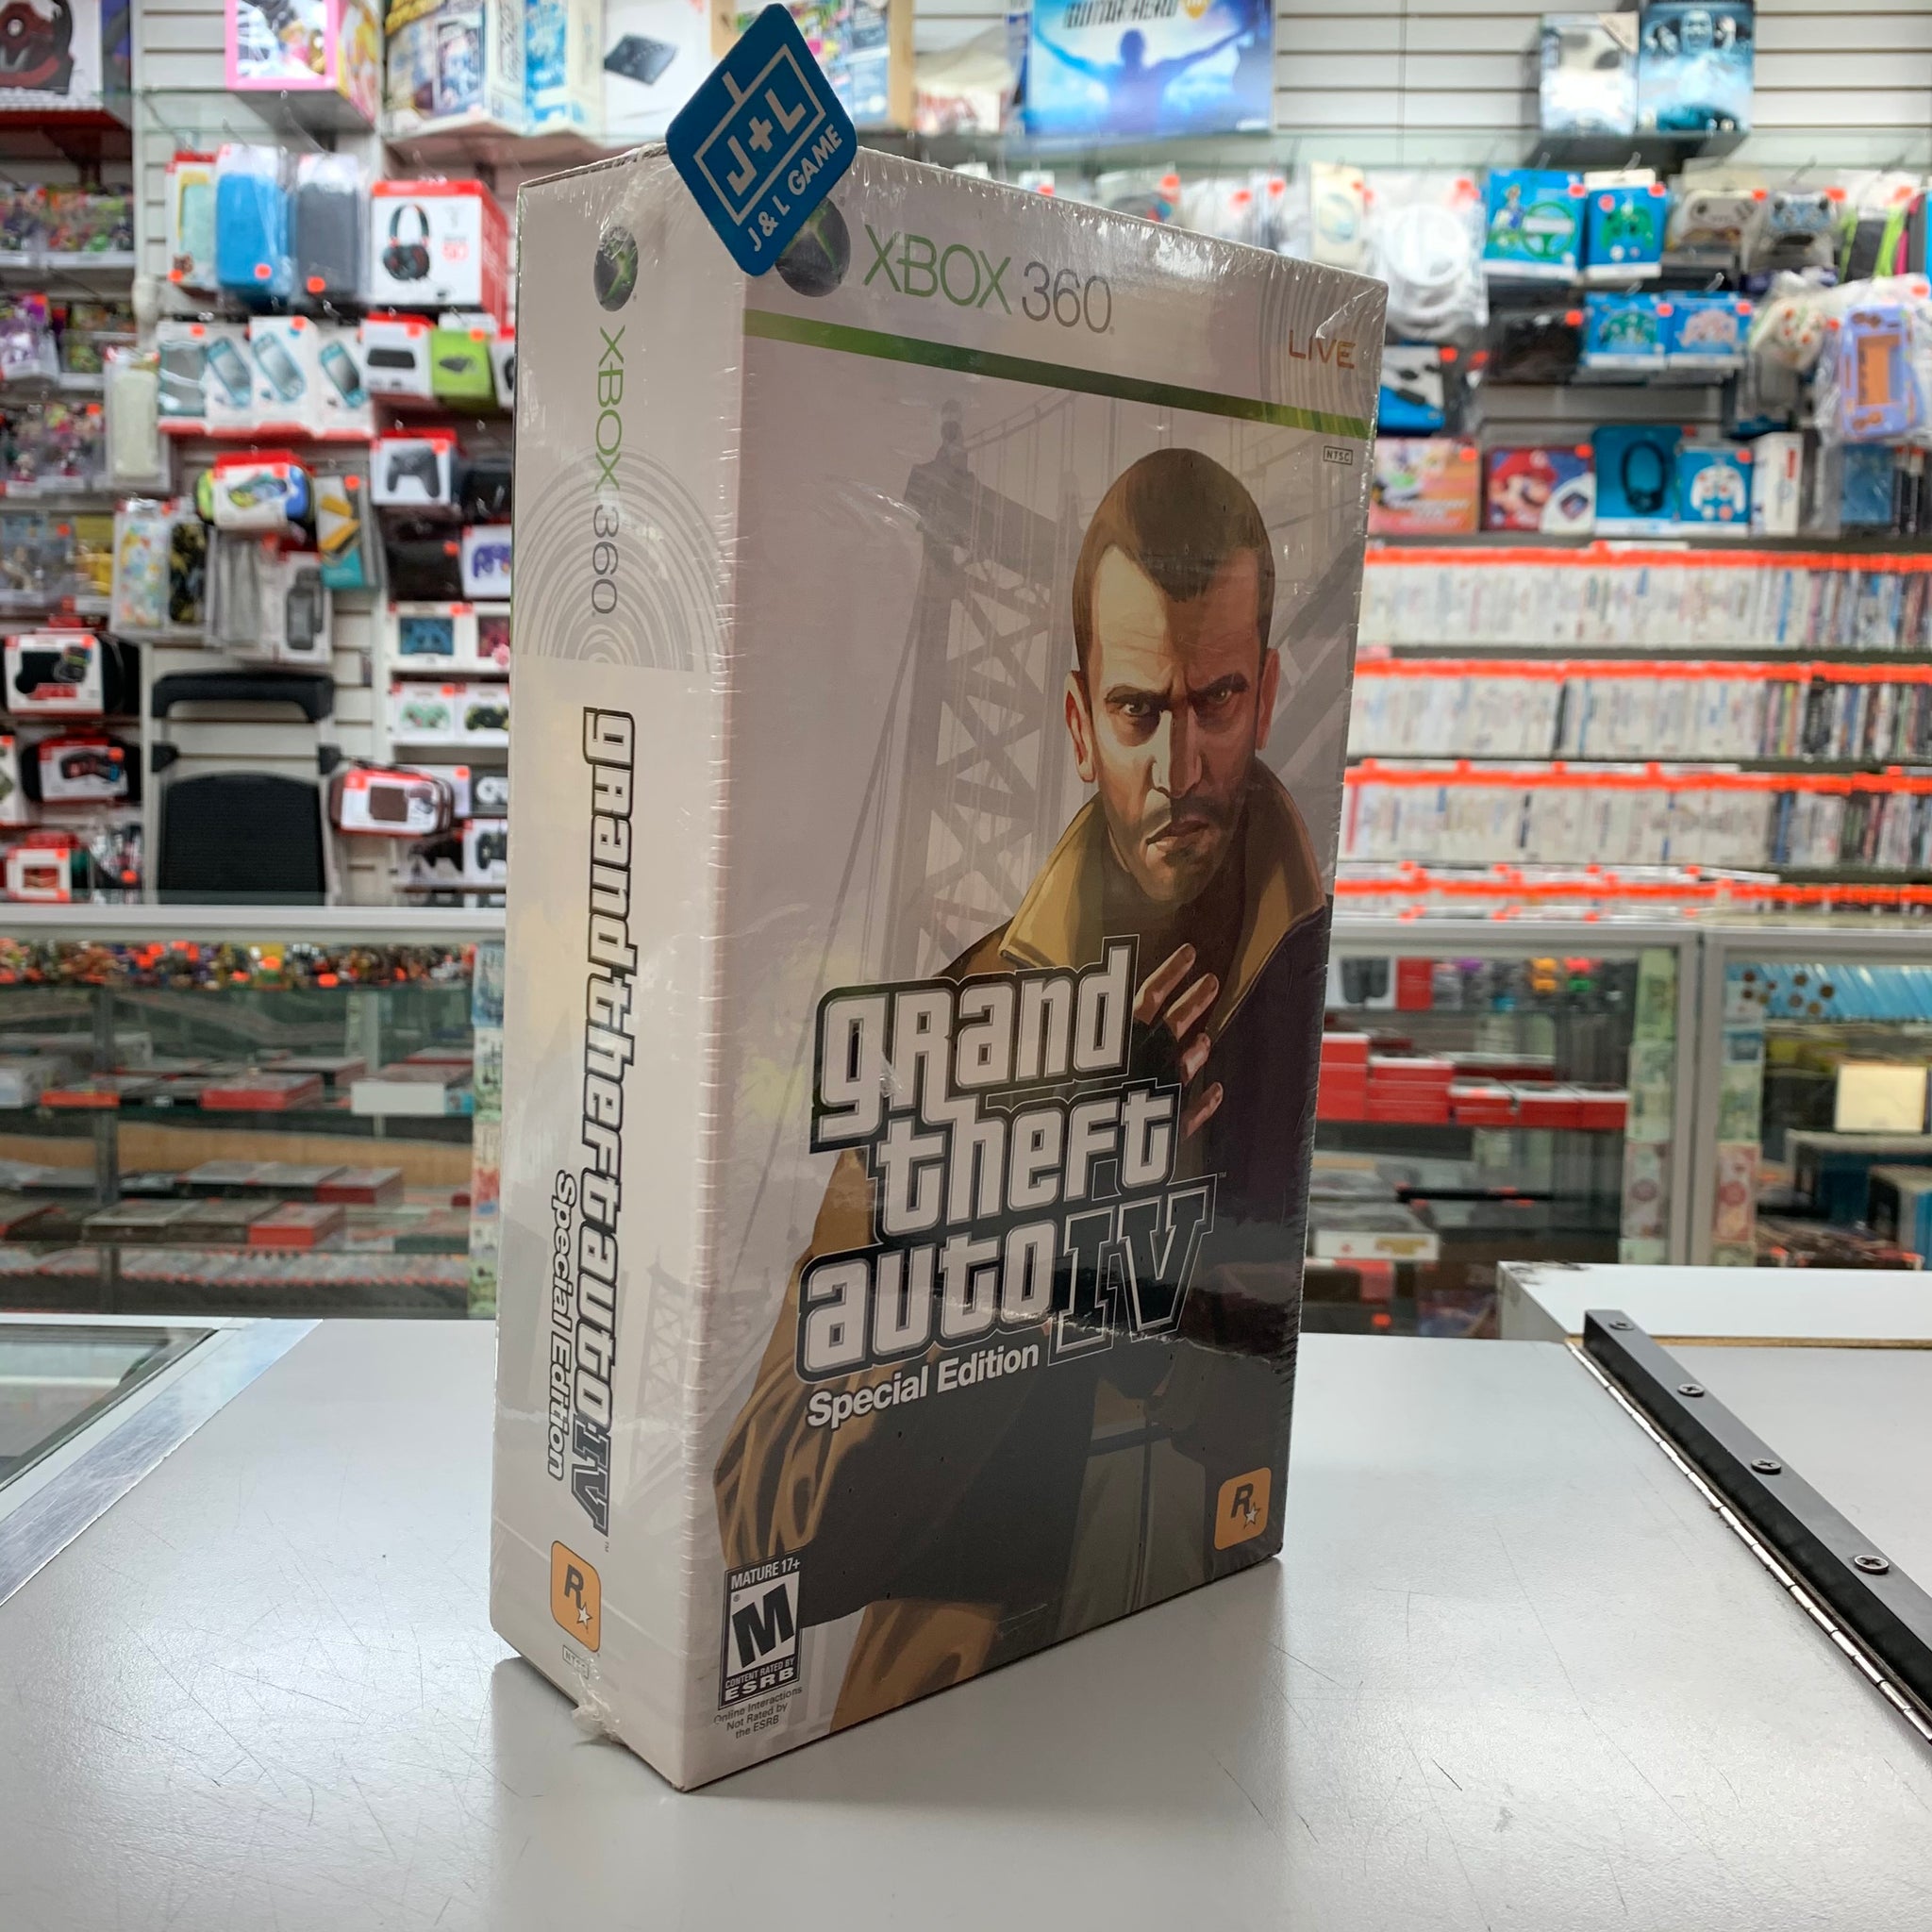 Grand Theft Auto IV: The Complete Edition - Xbox 360